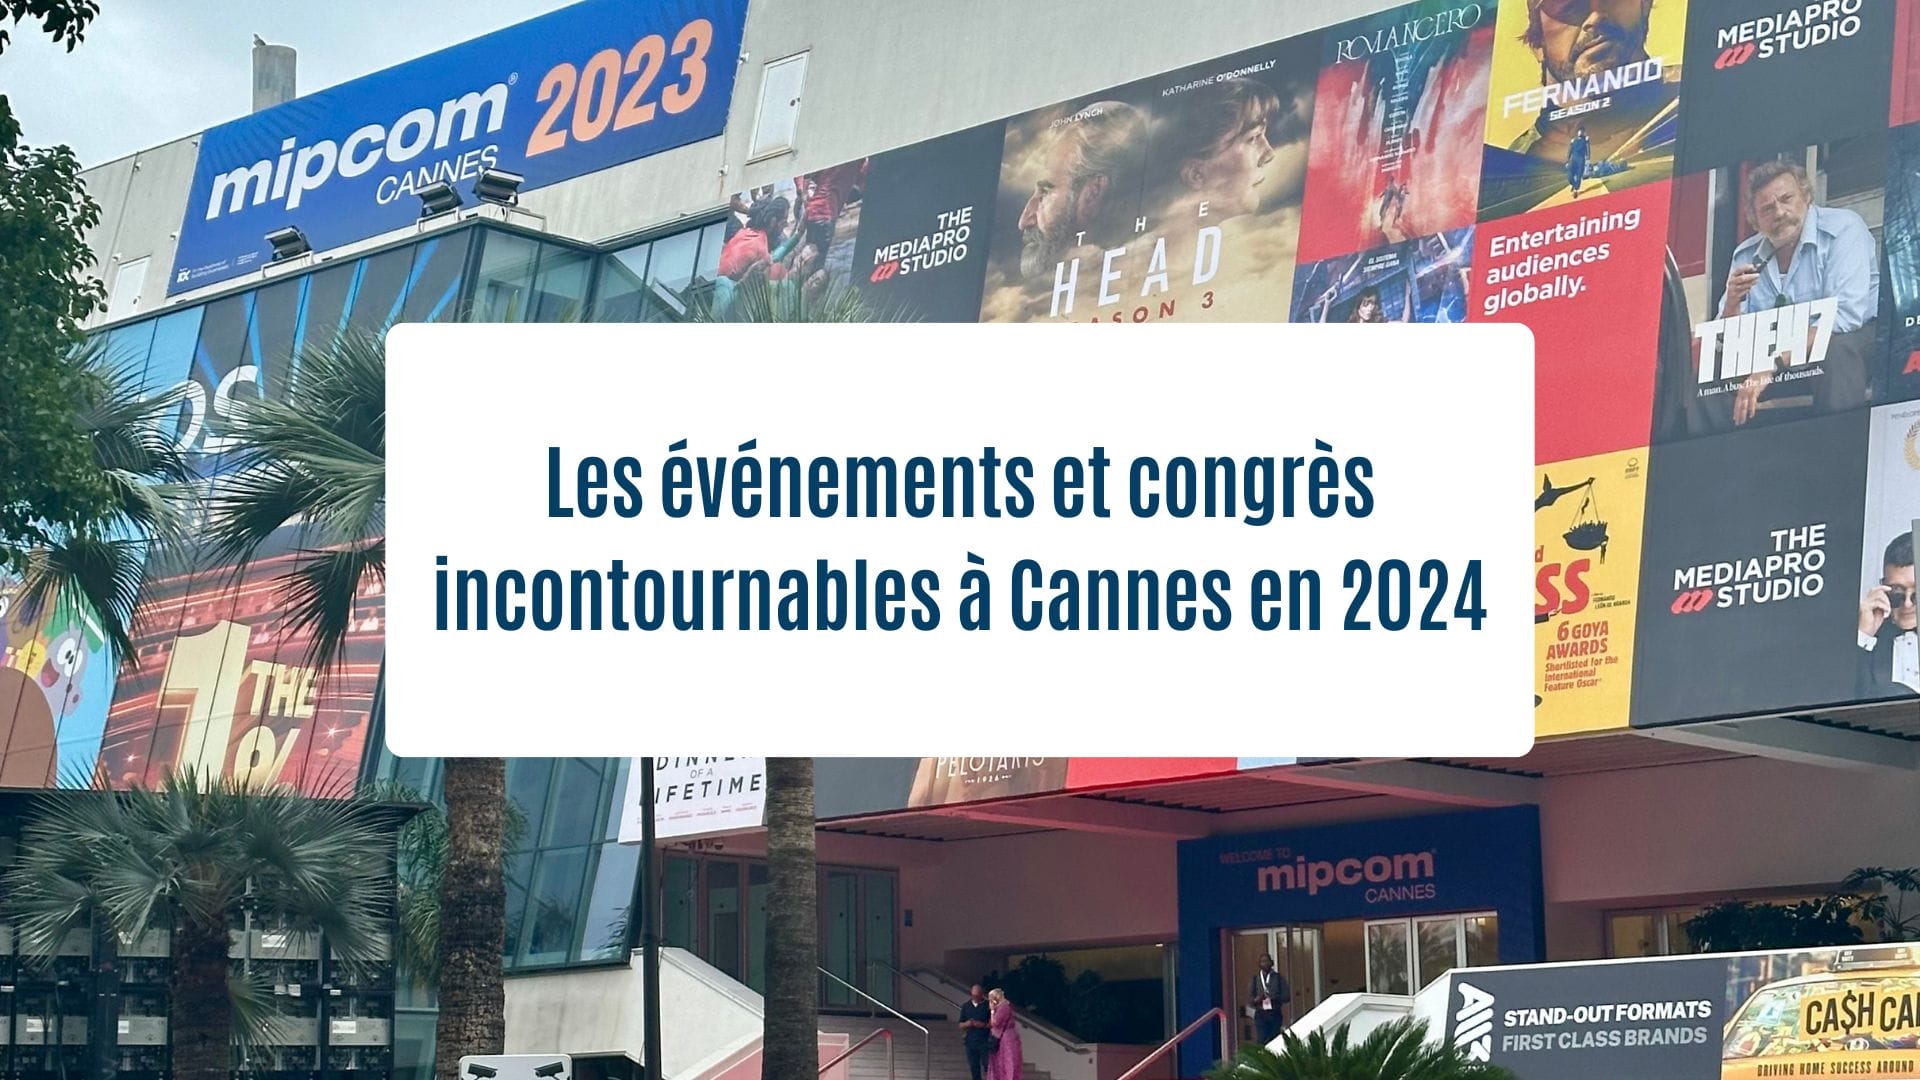 Events in Cannes in 2024 / Olam Properties Cannes